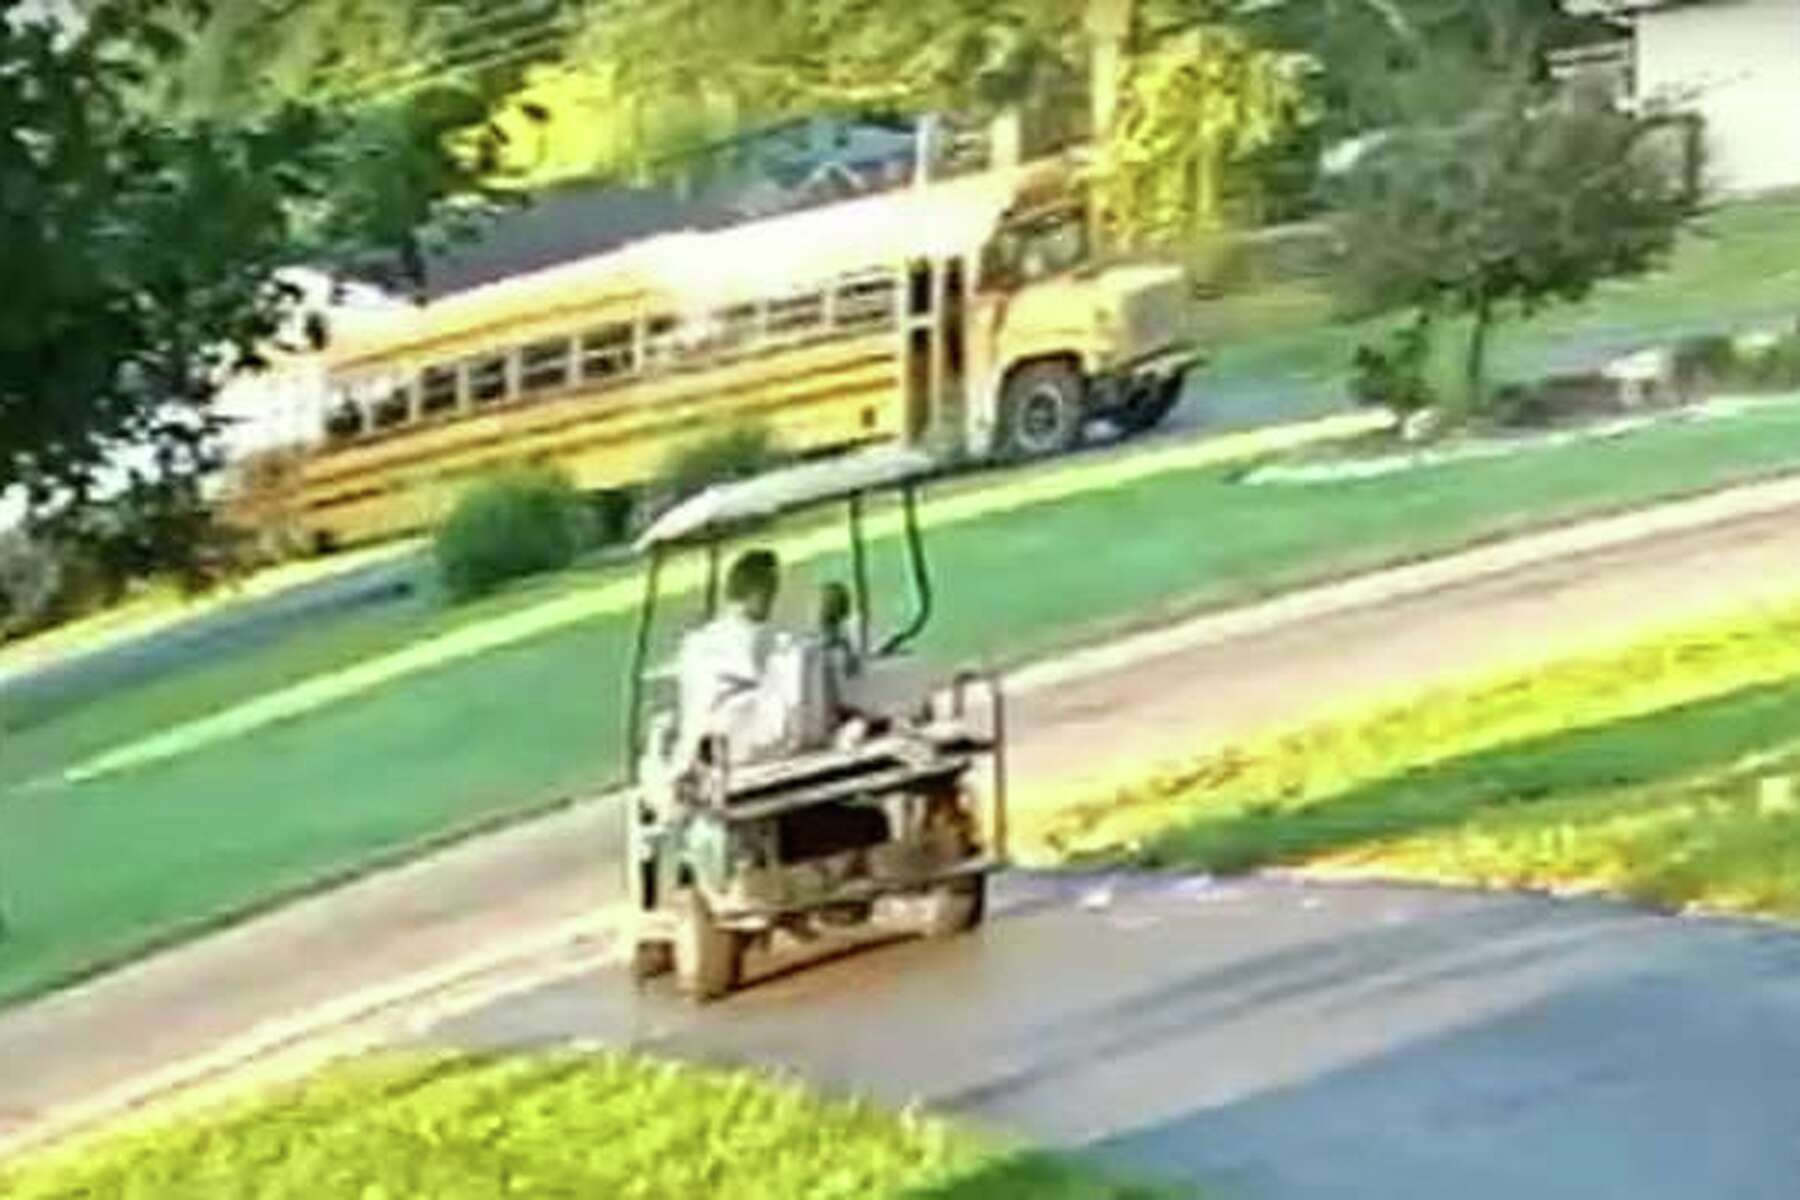 This creepy, unmarked school bus was seen prowling East Alton, trying to up kids. Police are investigating.